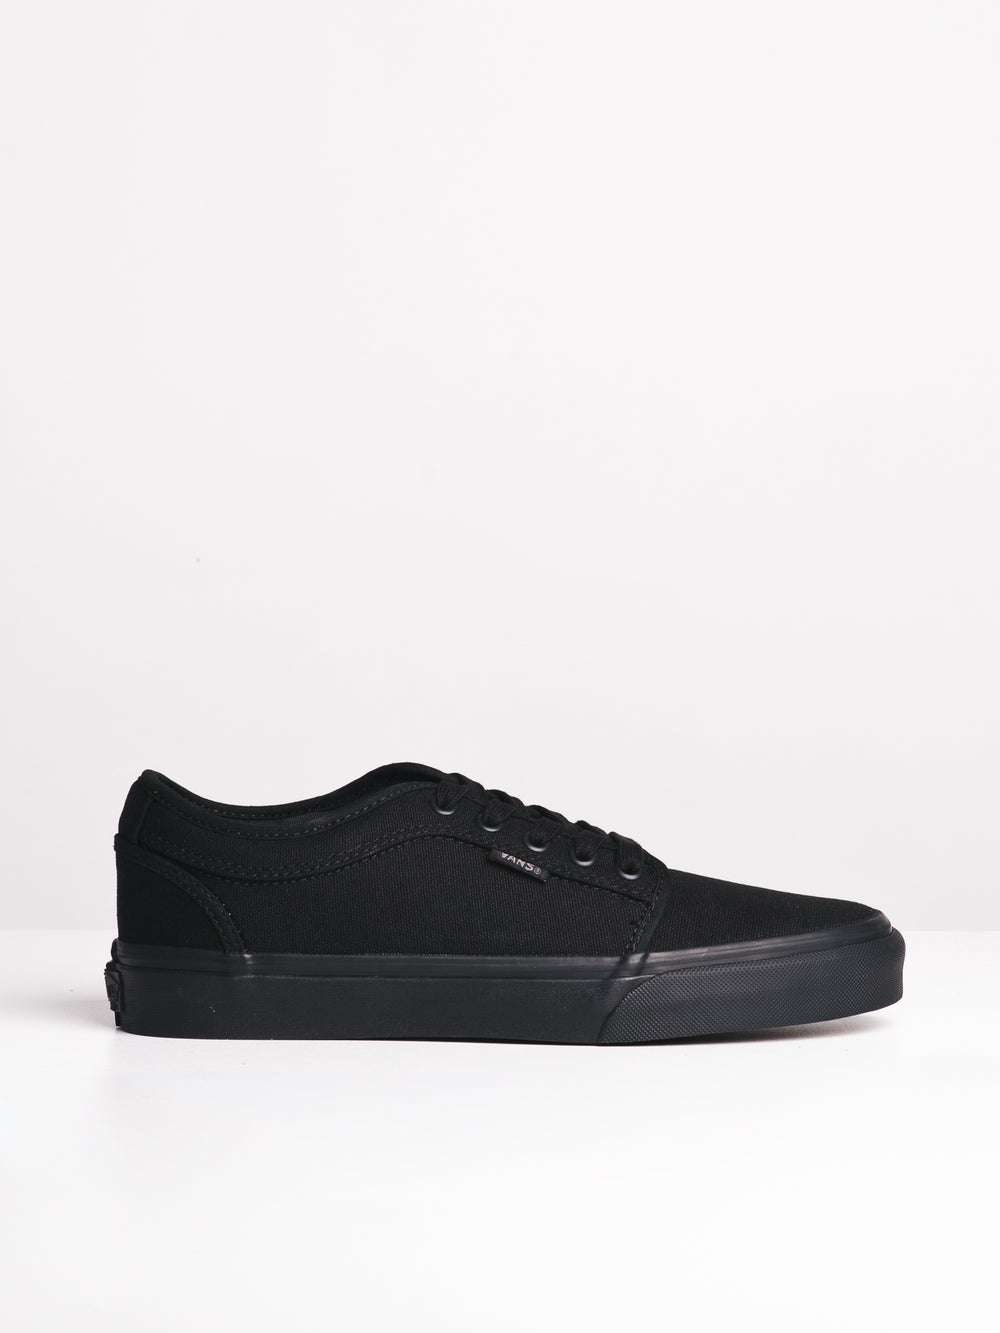 CHAUSSURES CHUKKA LO BLACKOUT POUR HOMME